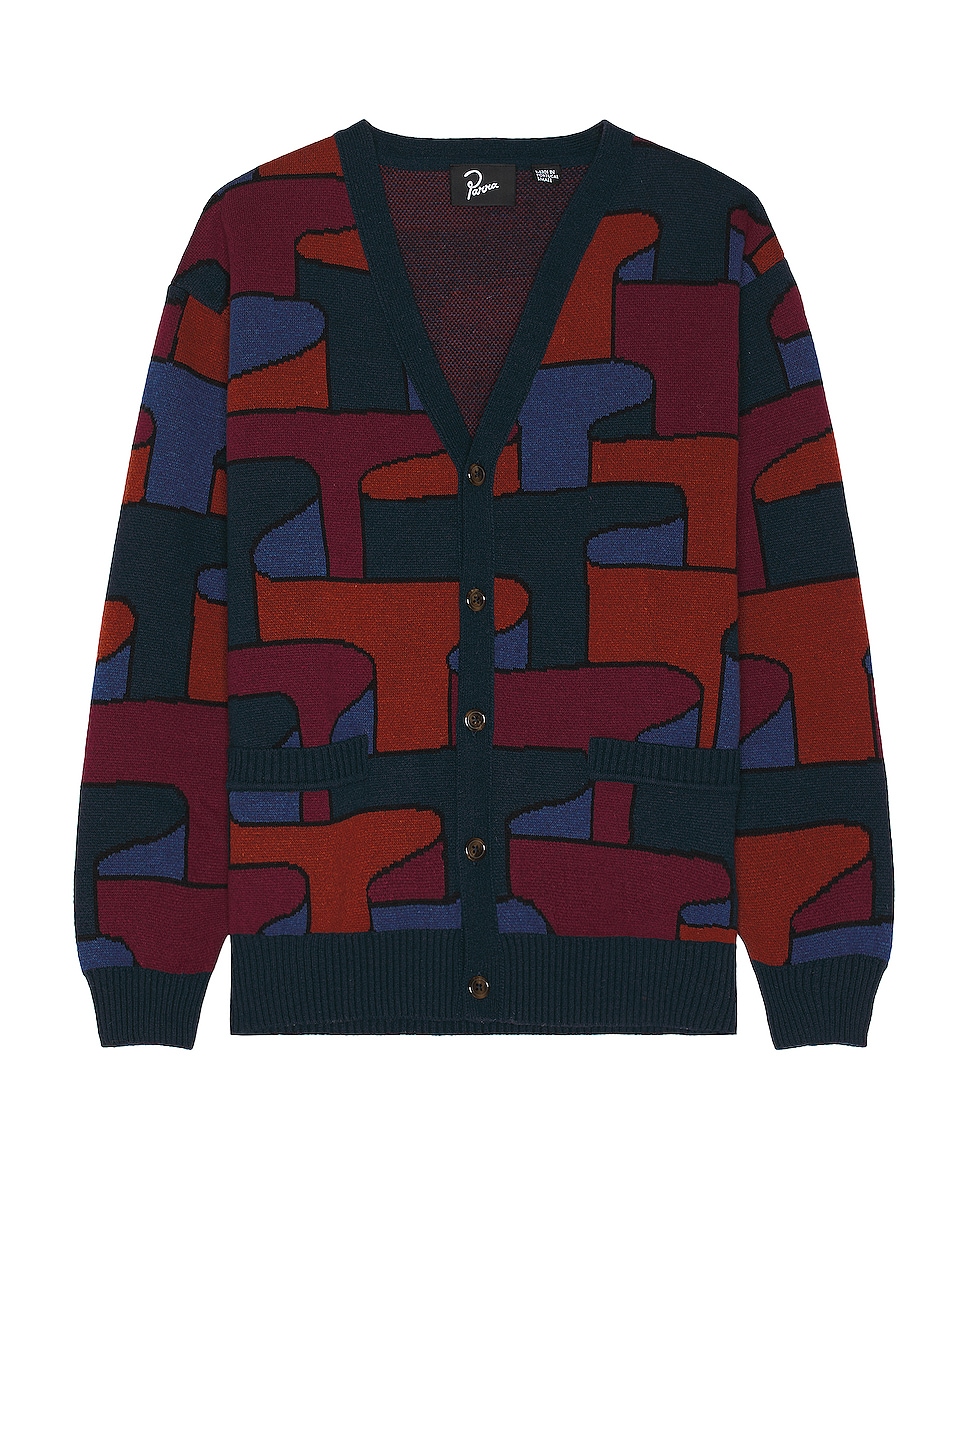 Image 1 of By Parra Canyons All Over Knitted Cardigan in Multi